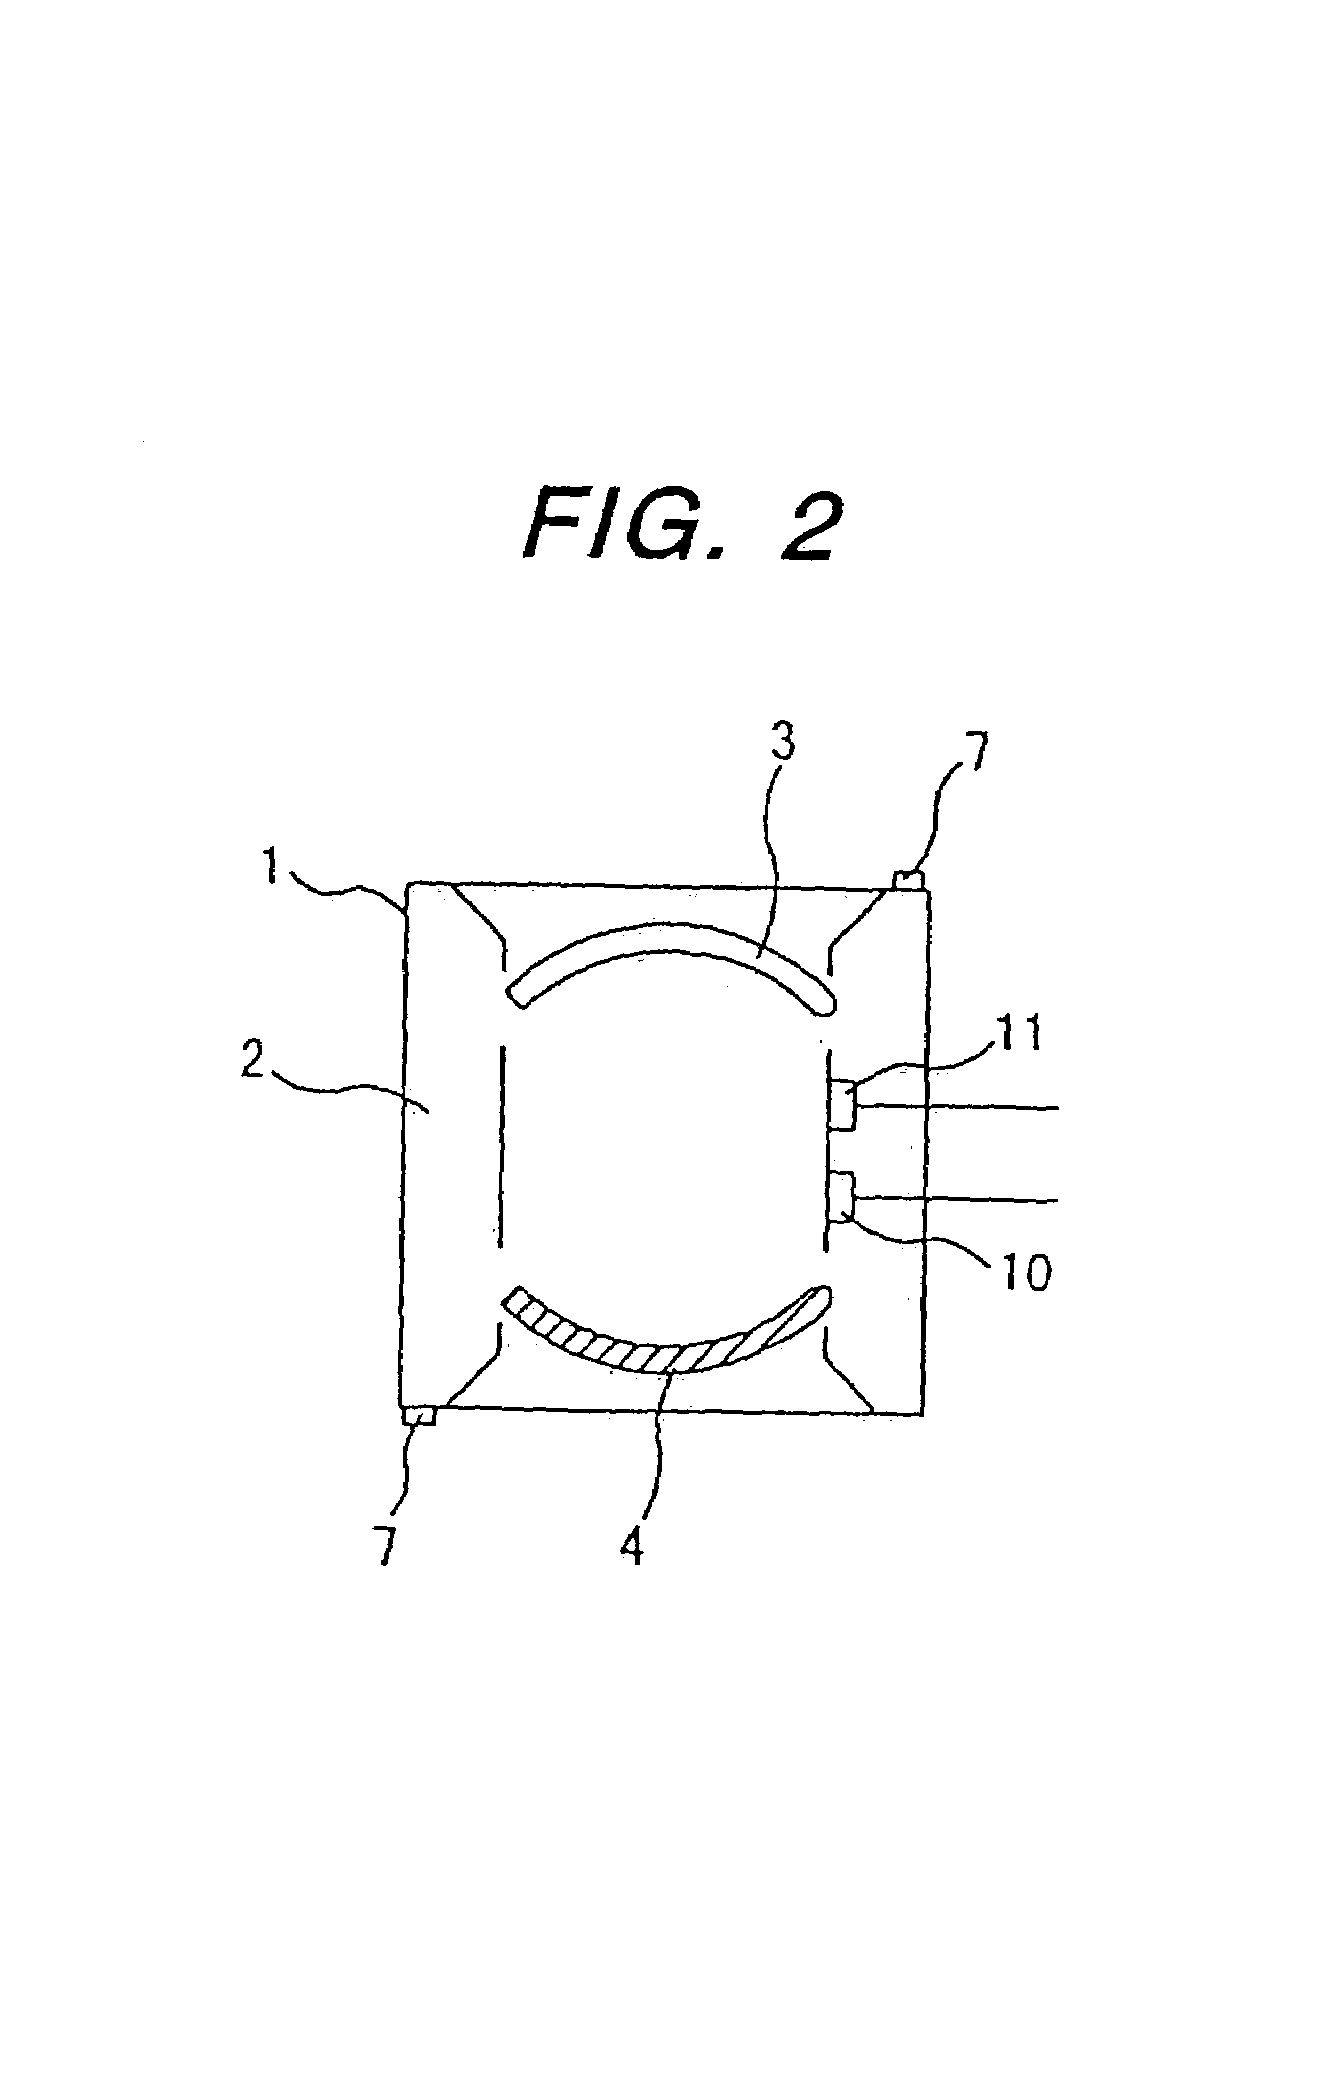 Method for controlling coming and going personnel, and a system thereof